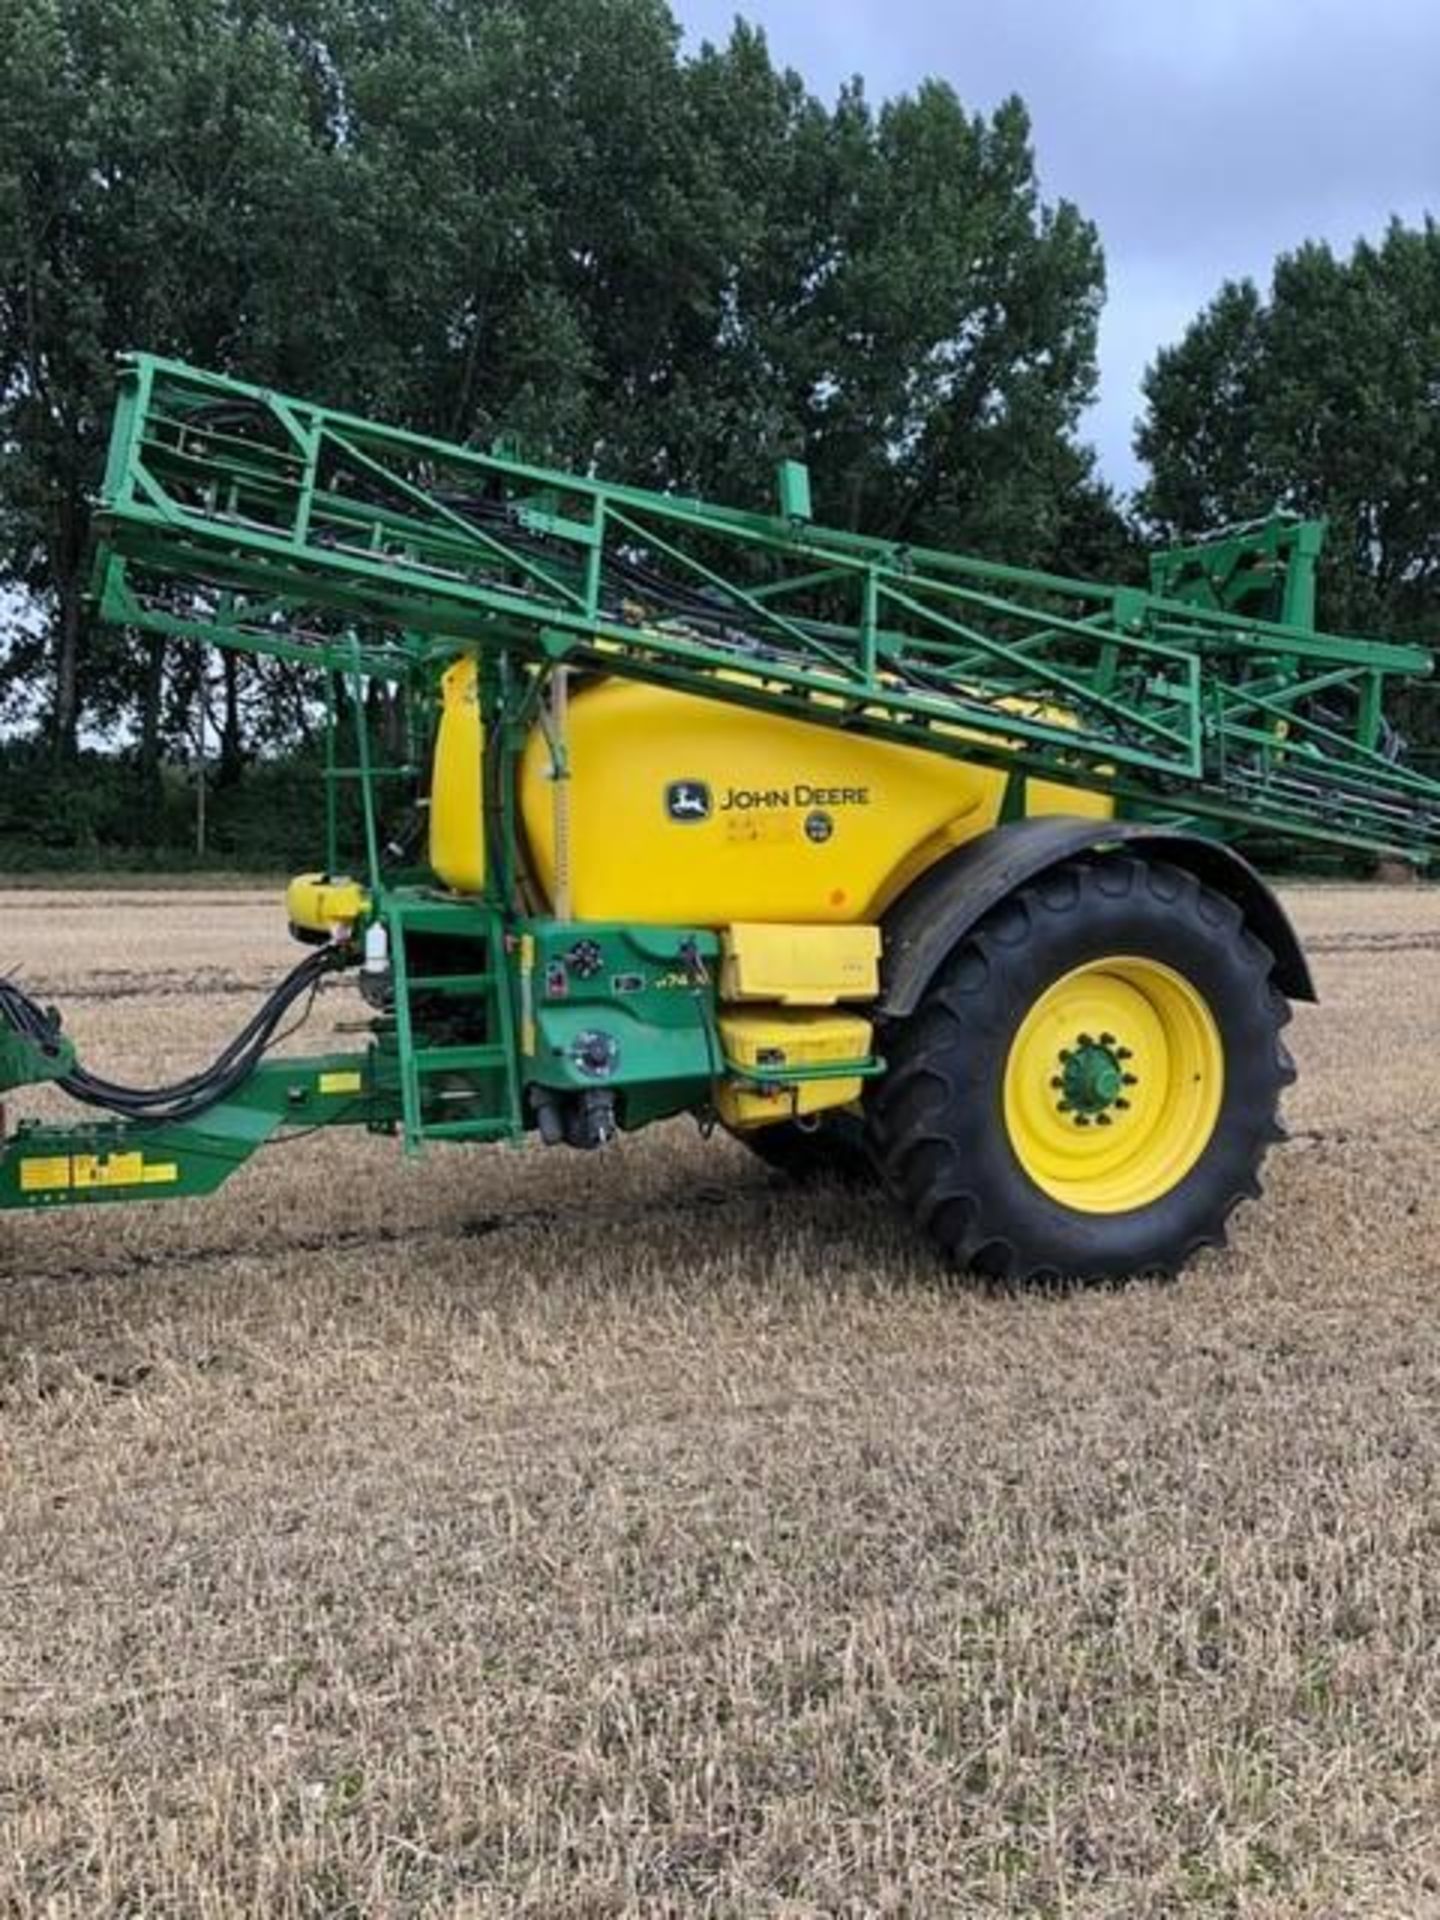 2017 John Deere M740i 24m trailed sprayer, 4000l tank on 520/85R38 wheels and tyres. Hectares: c.12, - Image 2 of 14